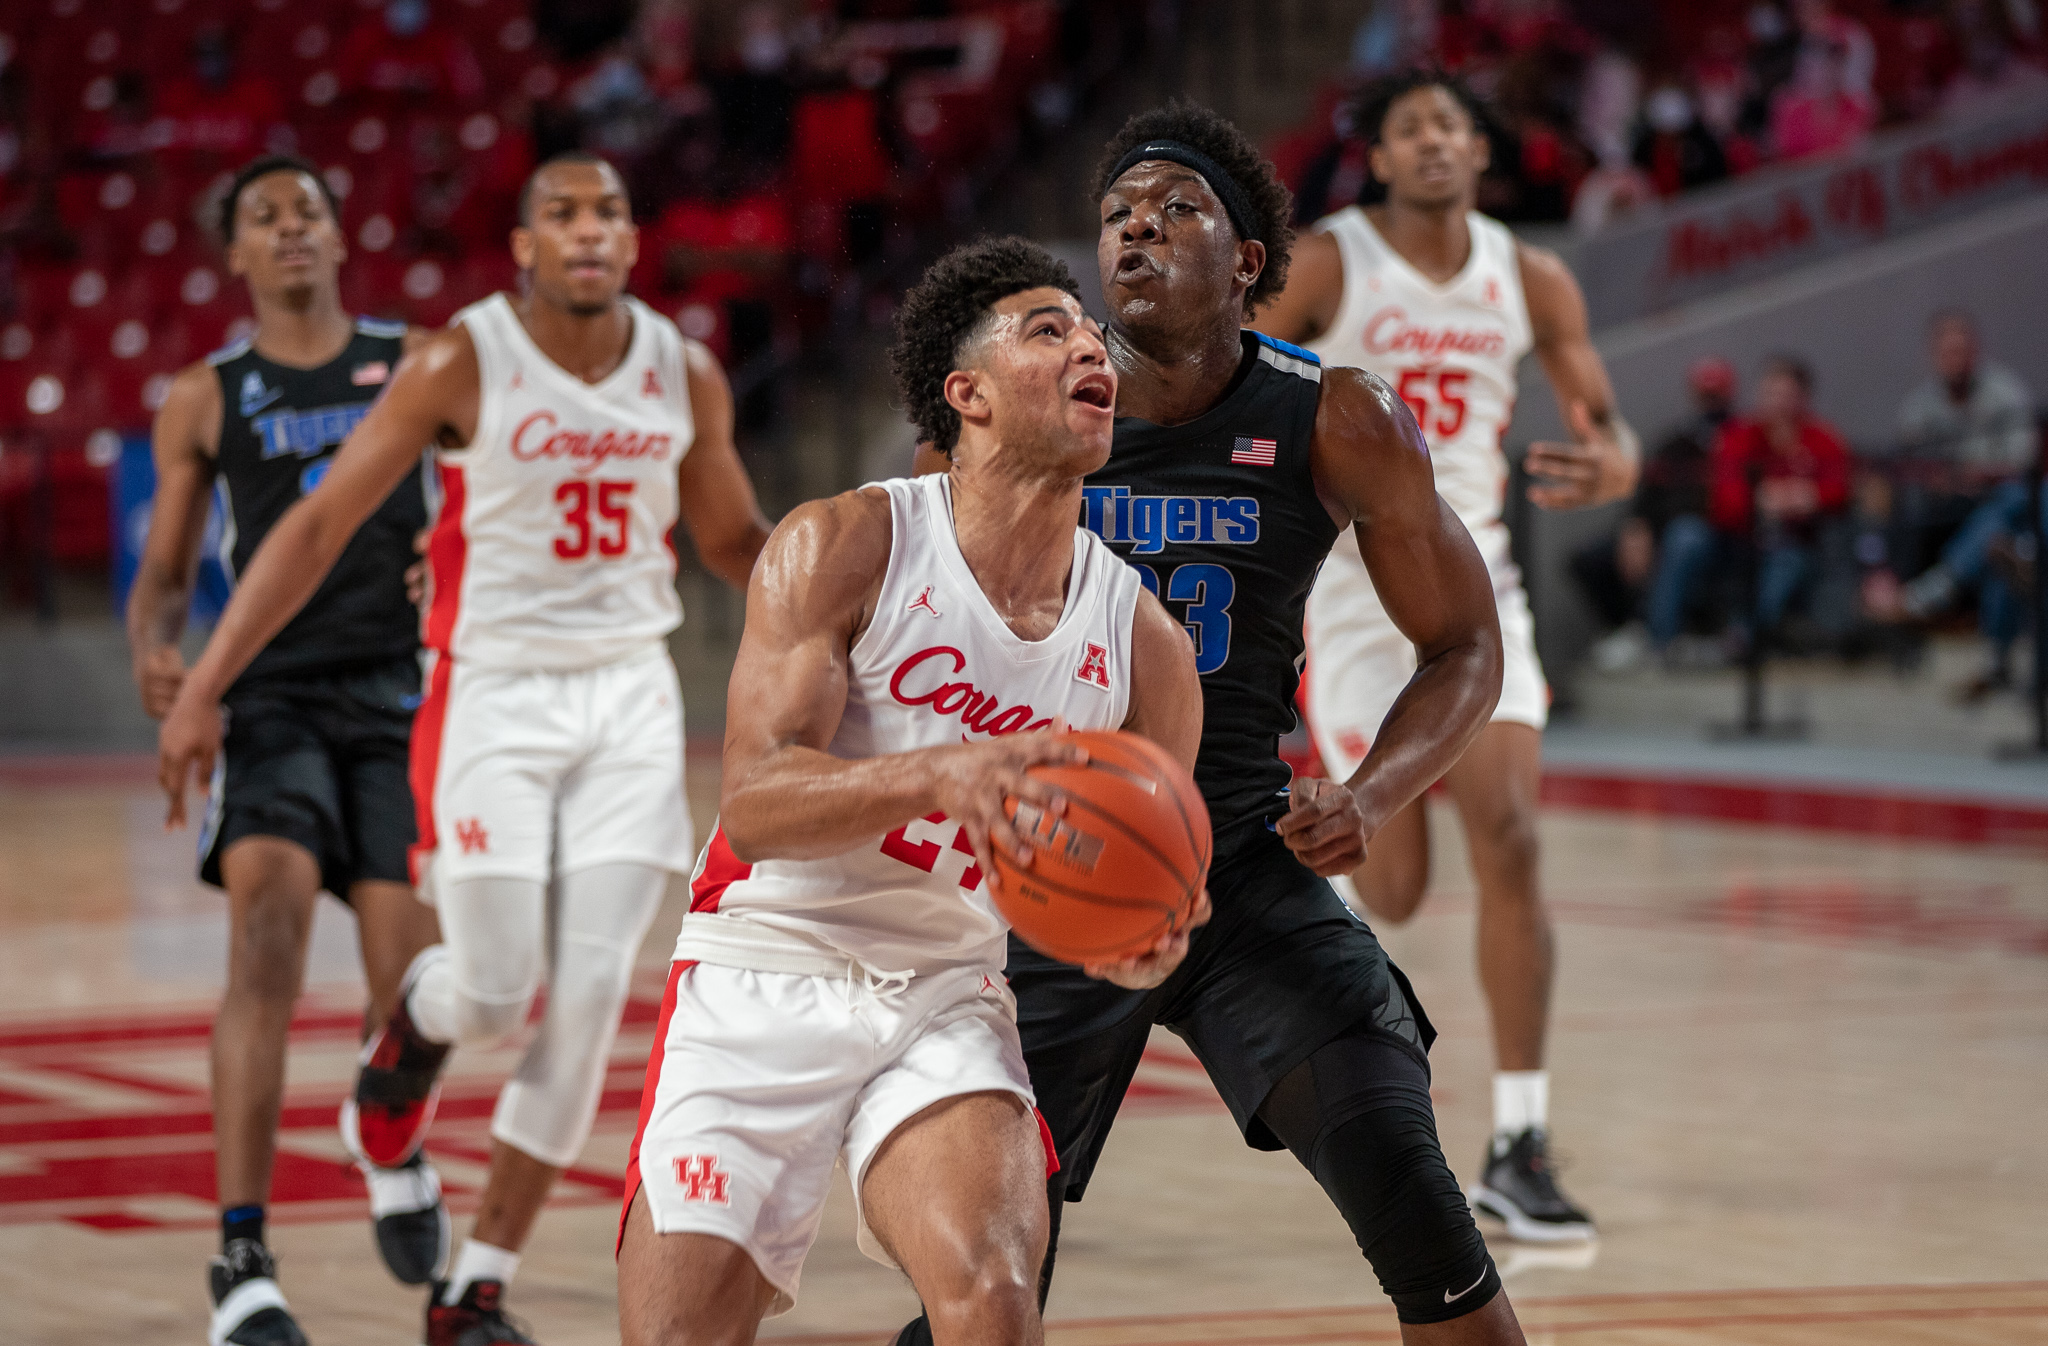 UH junior guard Quentin Grimes goes up for a layup during last Sunday's game against Memphis at Fertitta Center. | Andy Yanez/The Cougar